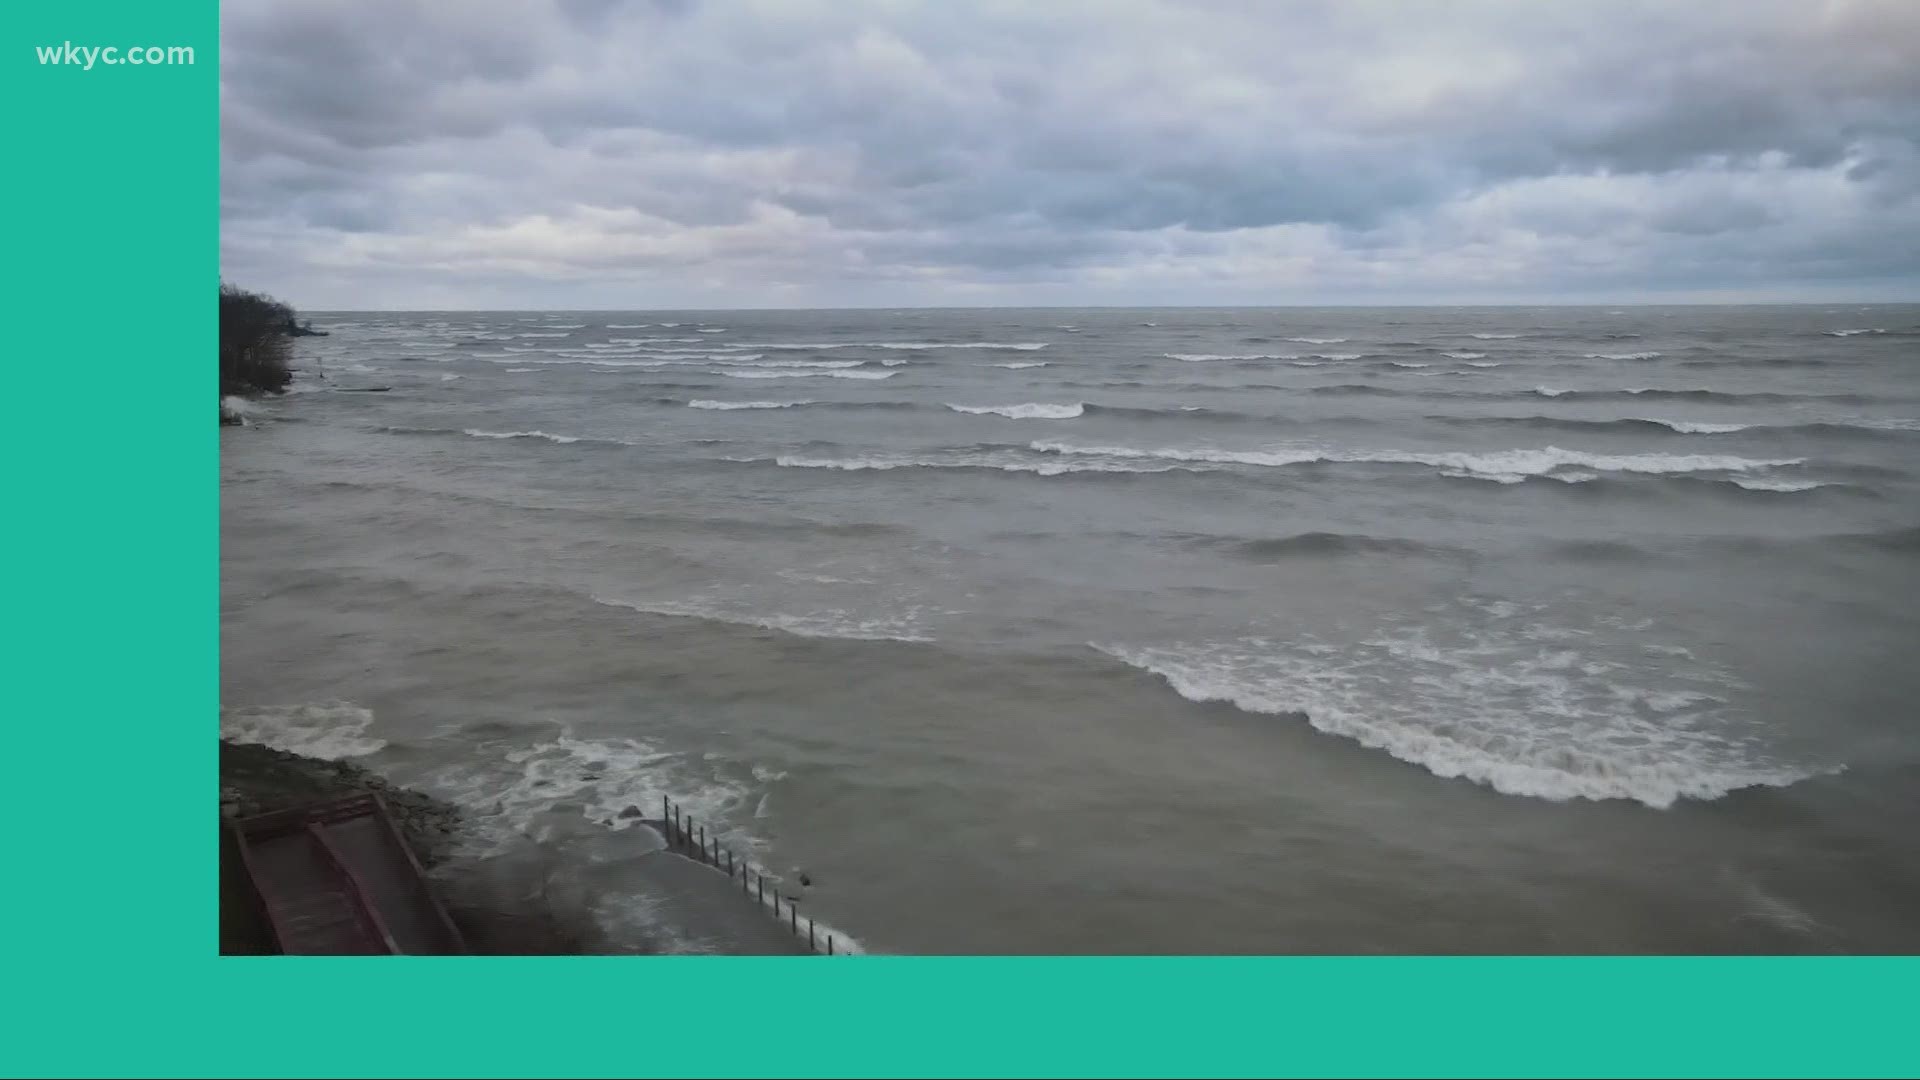 Nov. 20, 2020: 3News' Matt Standridge explores why Geneva-on-the-Lake is among the best places to watch Lake Erie's waves.